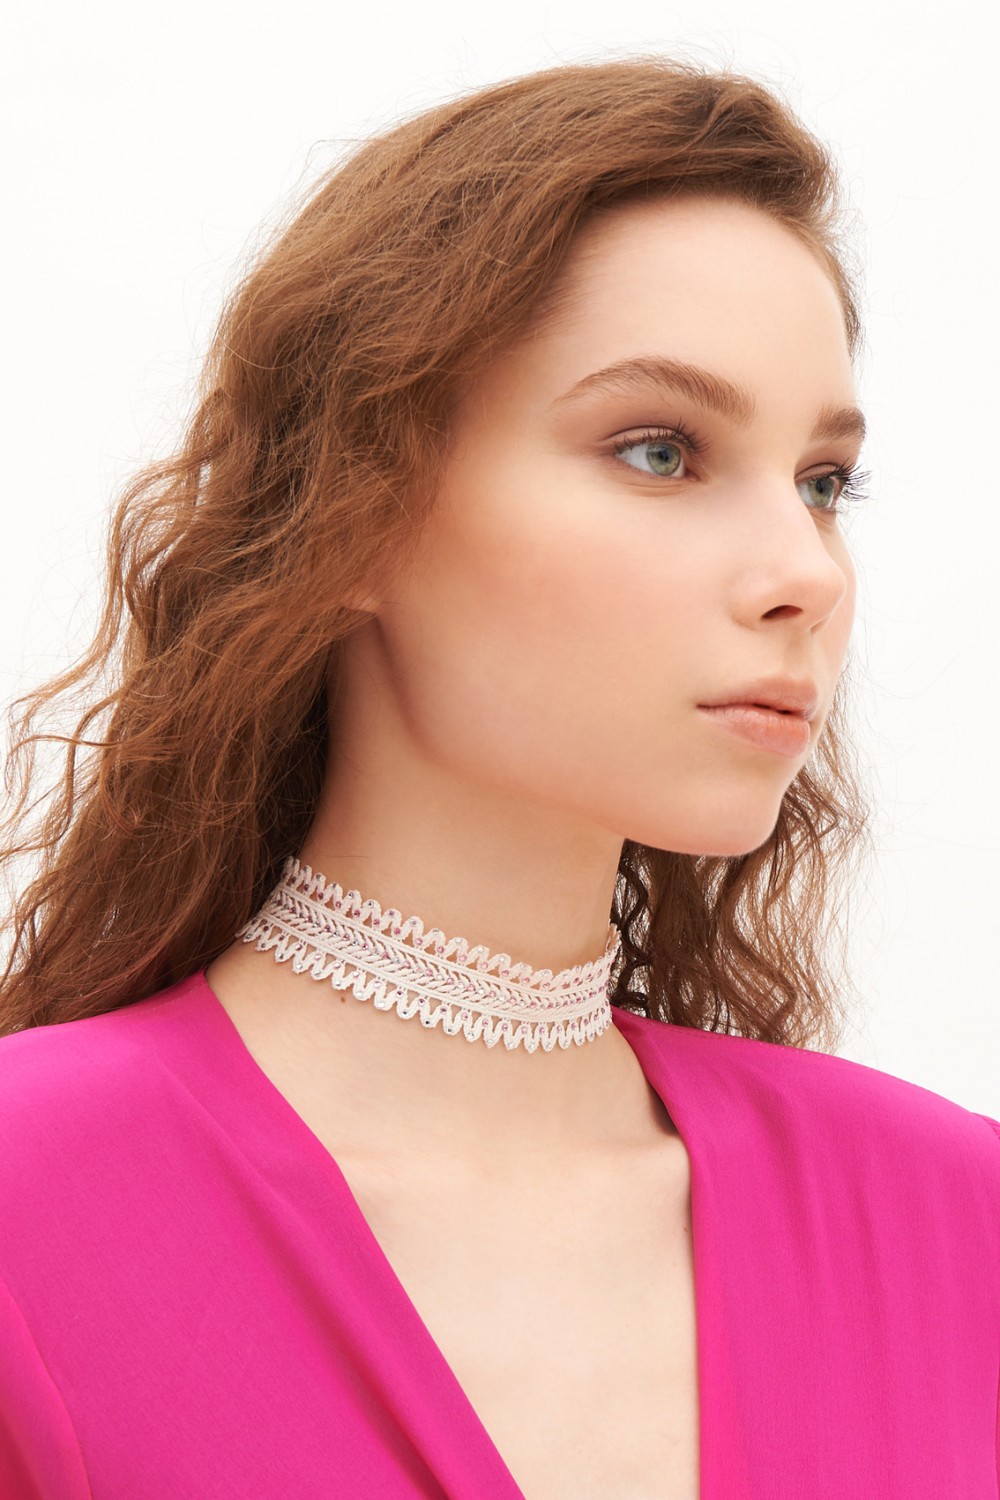 Lace choker with crystals